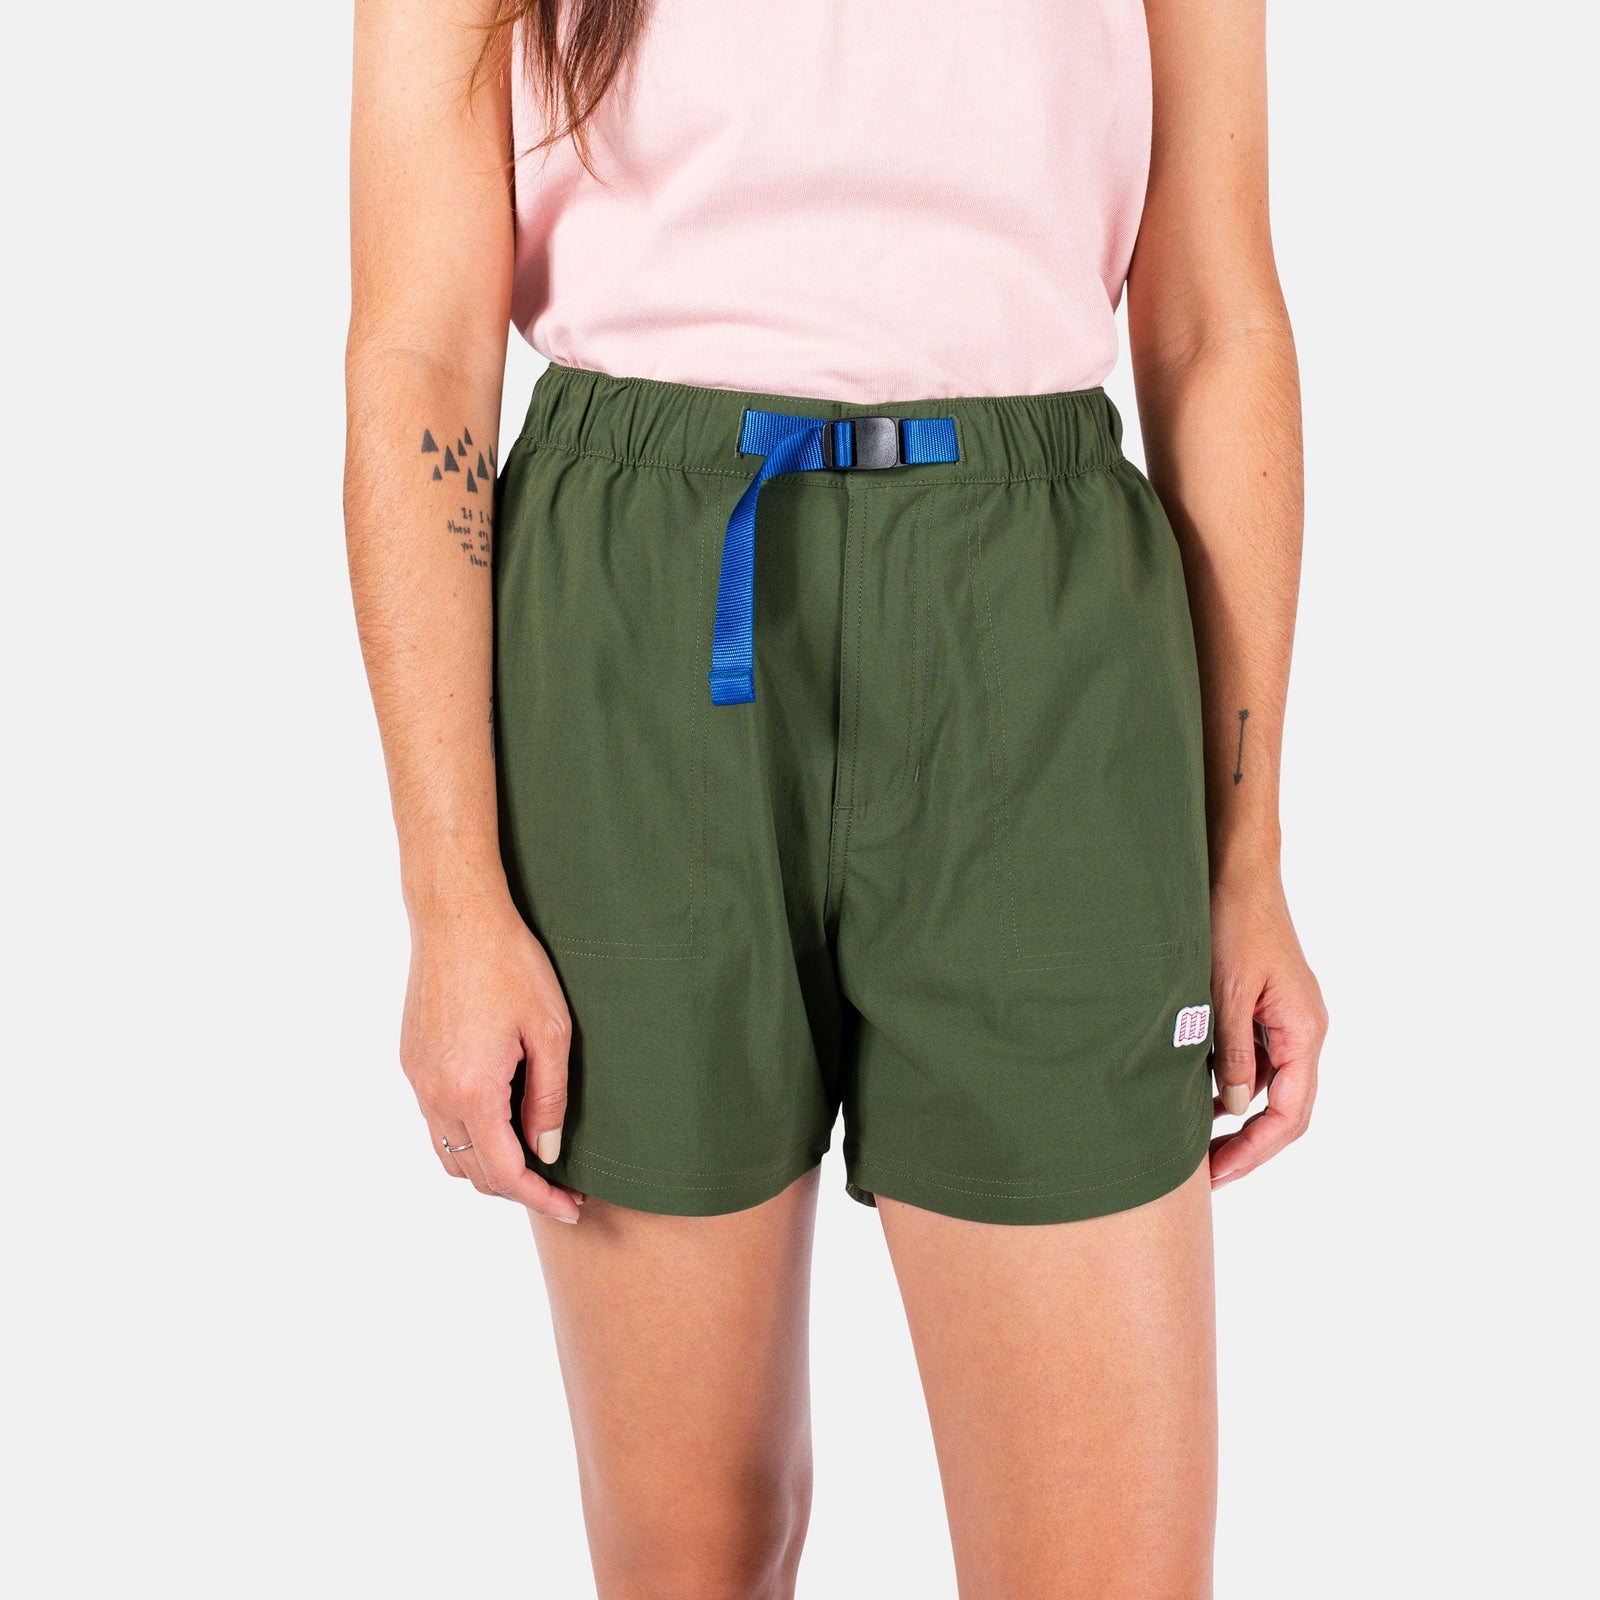 General close-up front model shot of Topo Designs Women's River Shorts in olive green.